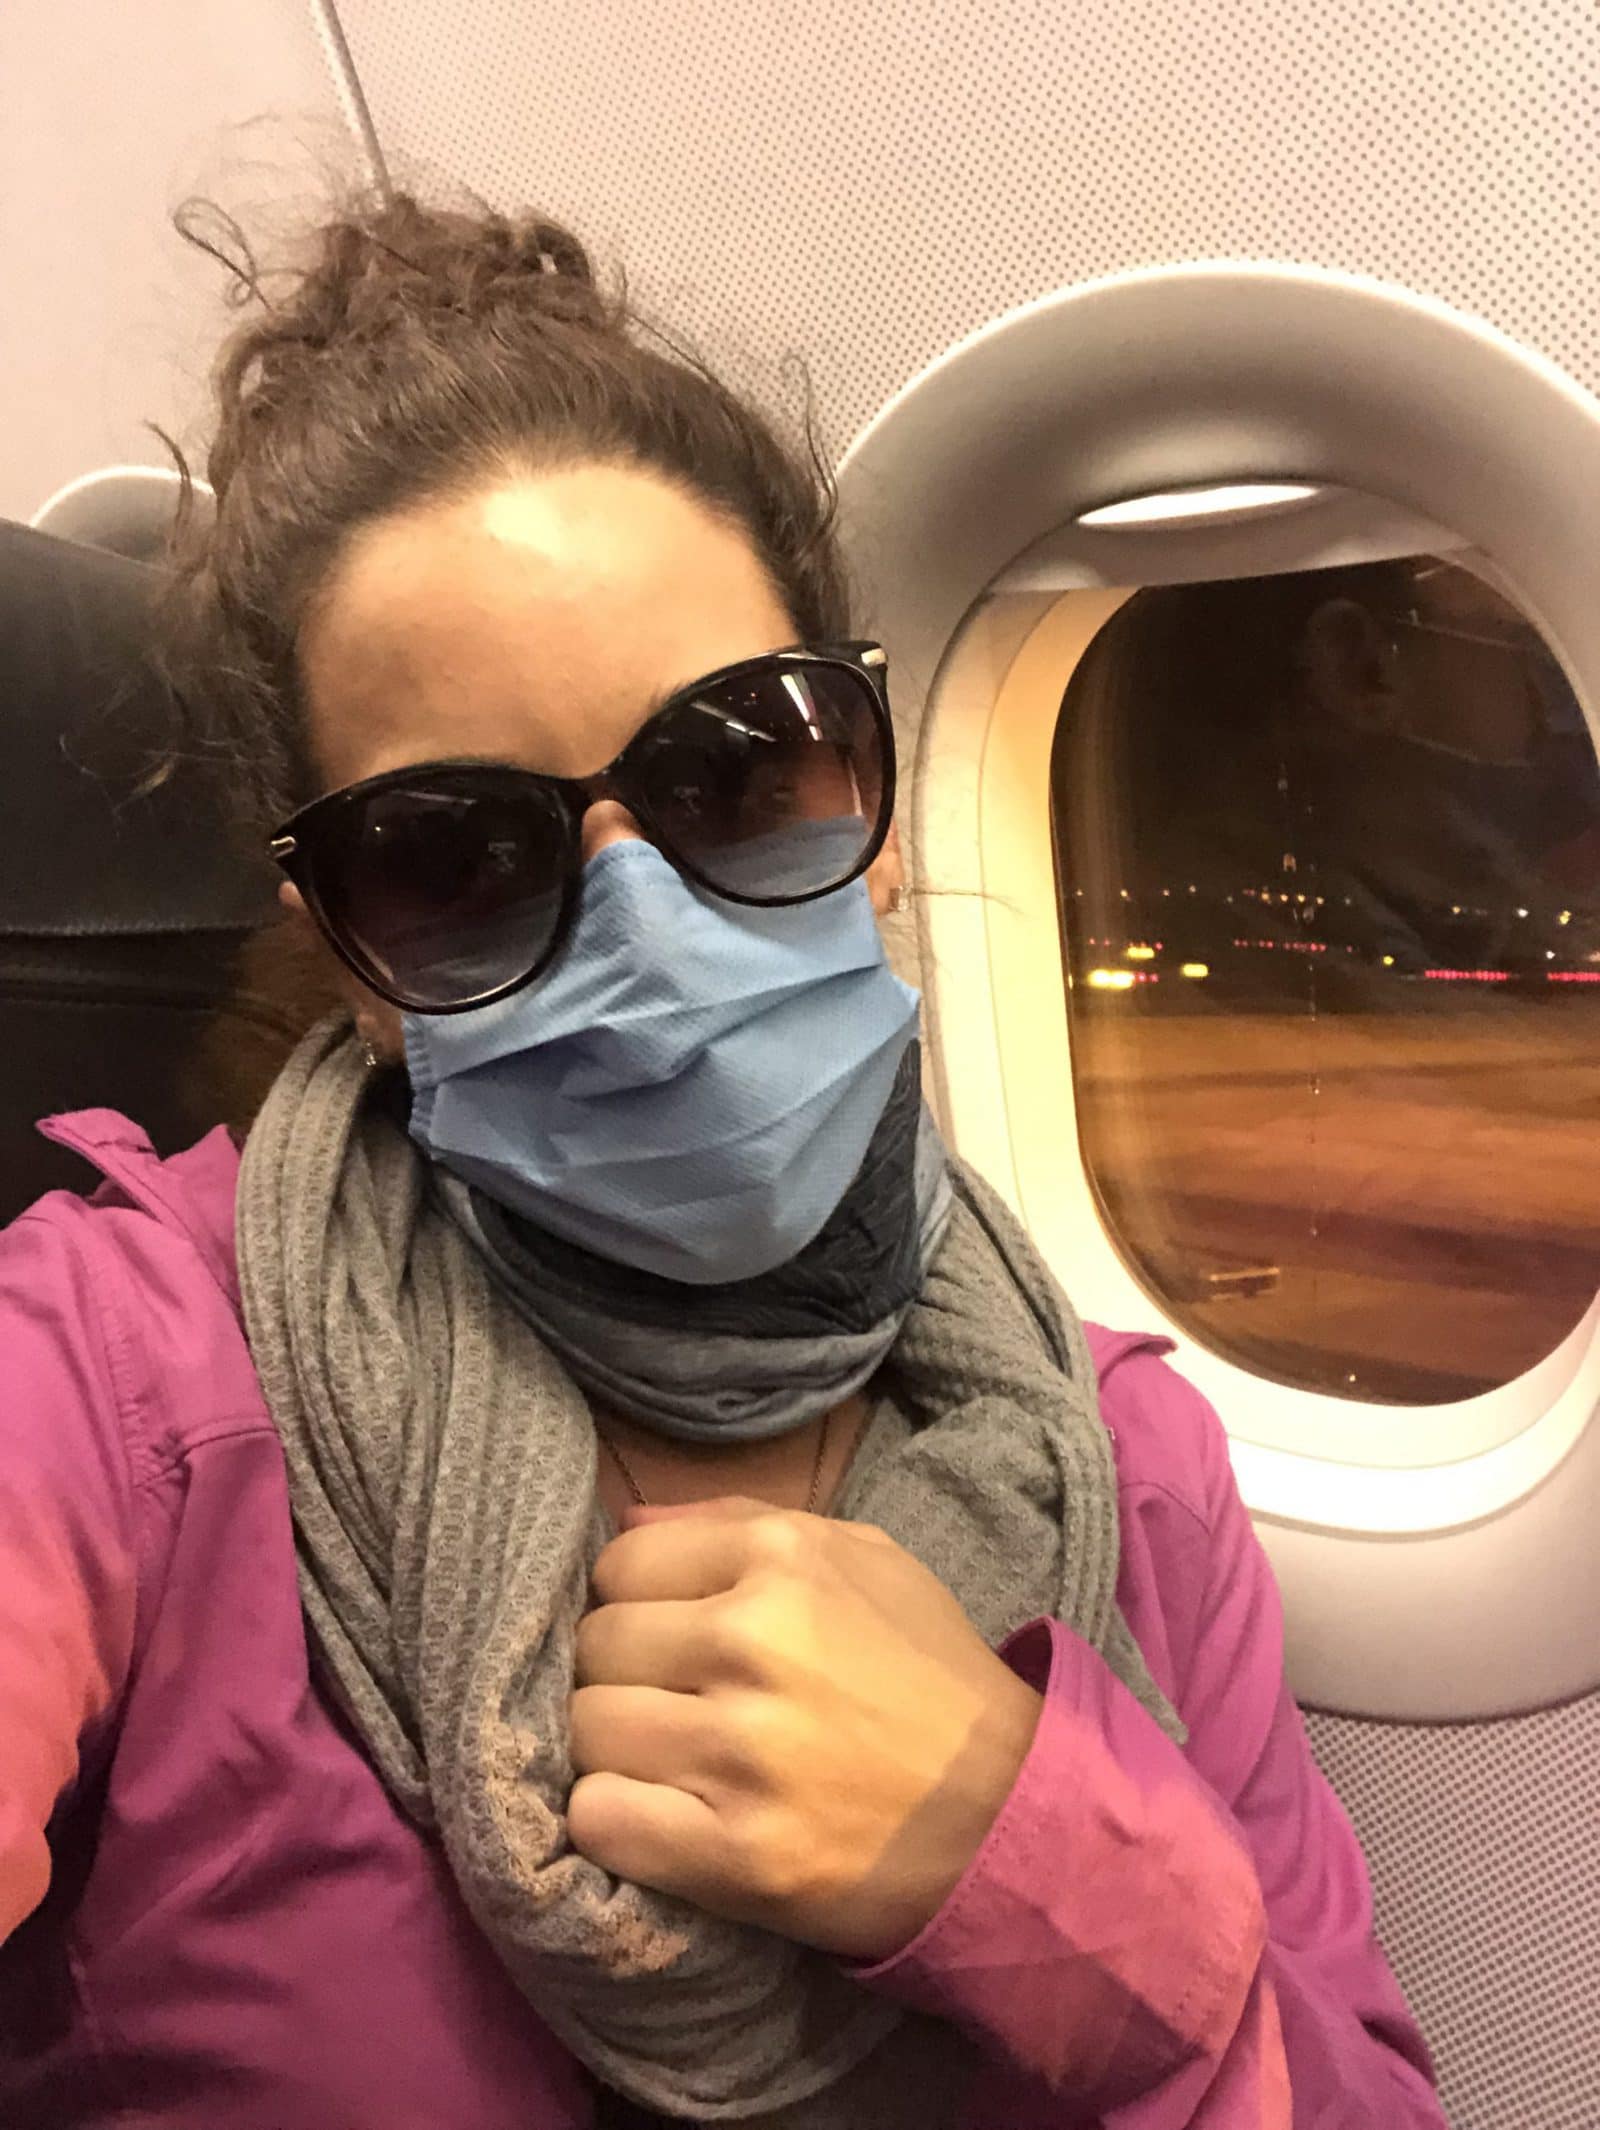 Me on a flight during the pandemic